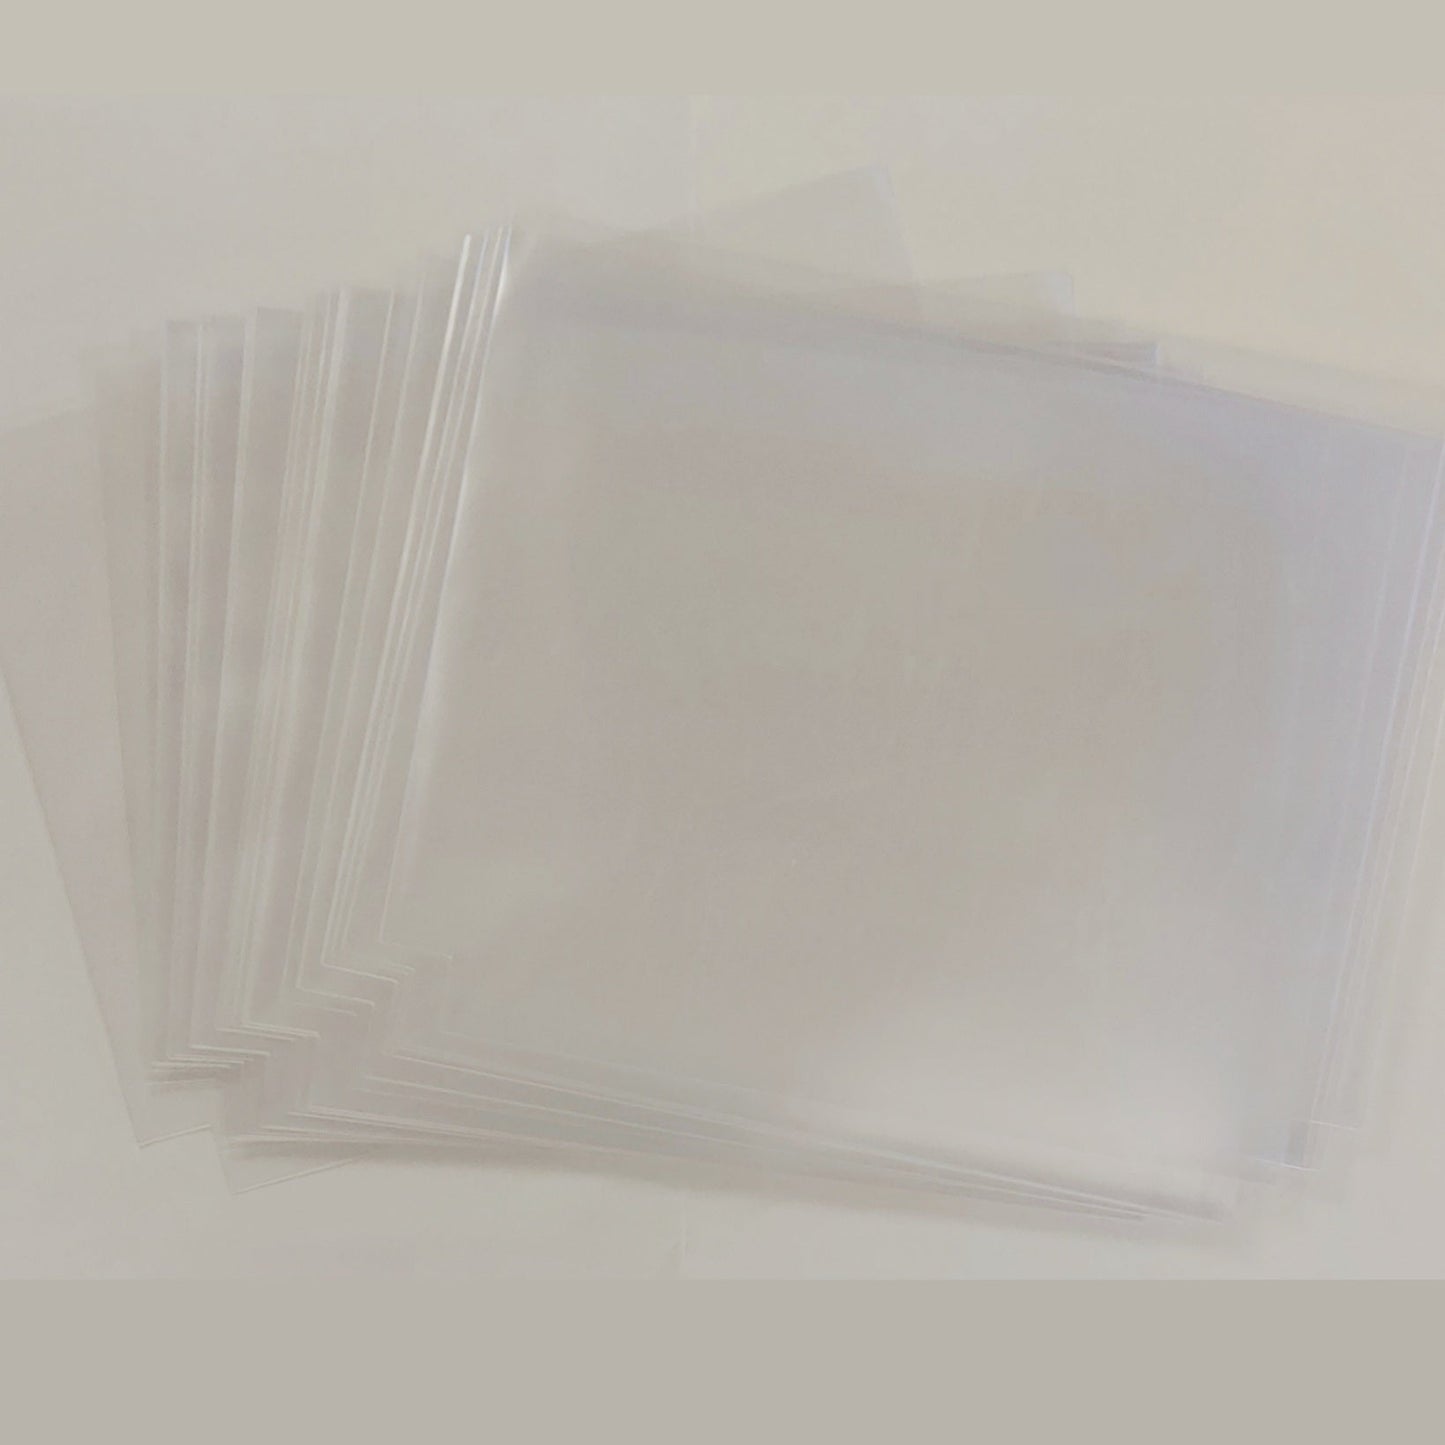 Double_CD_Japanese_Open-Top_Protective_Sleeves